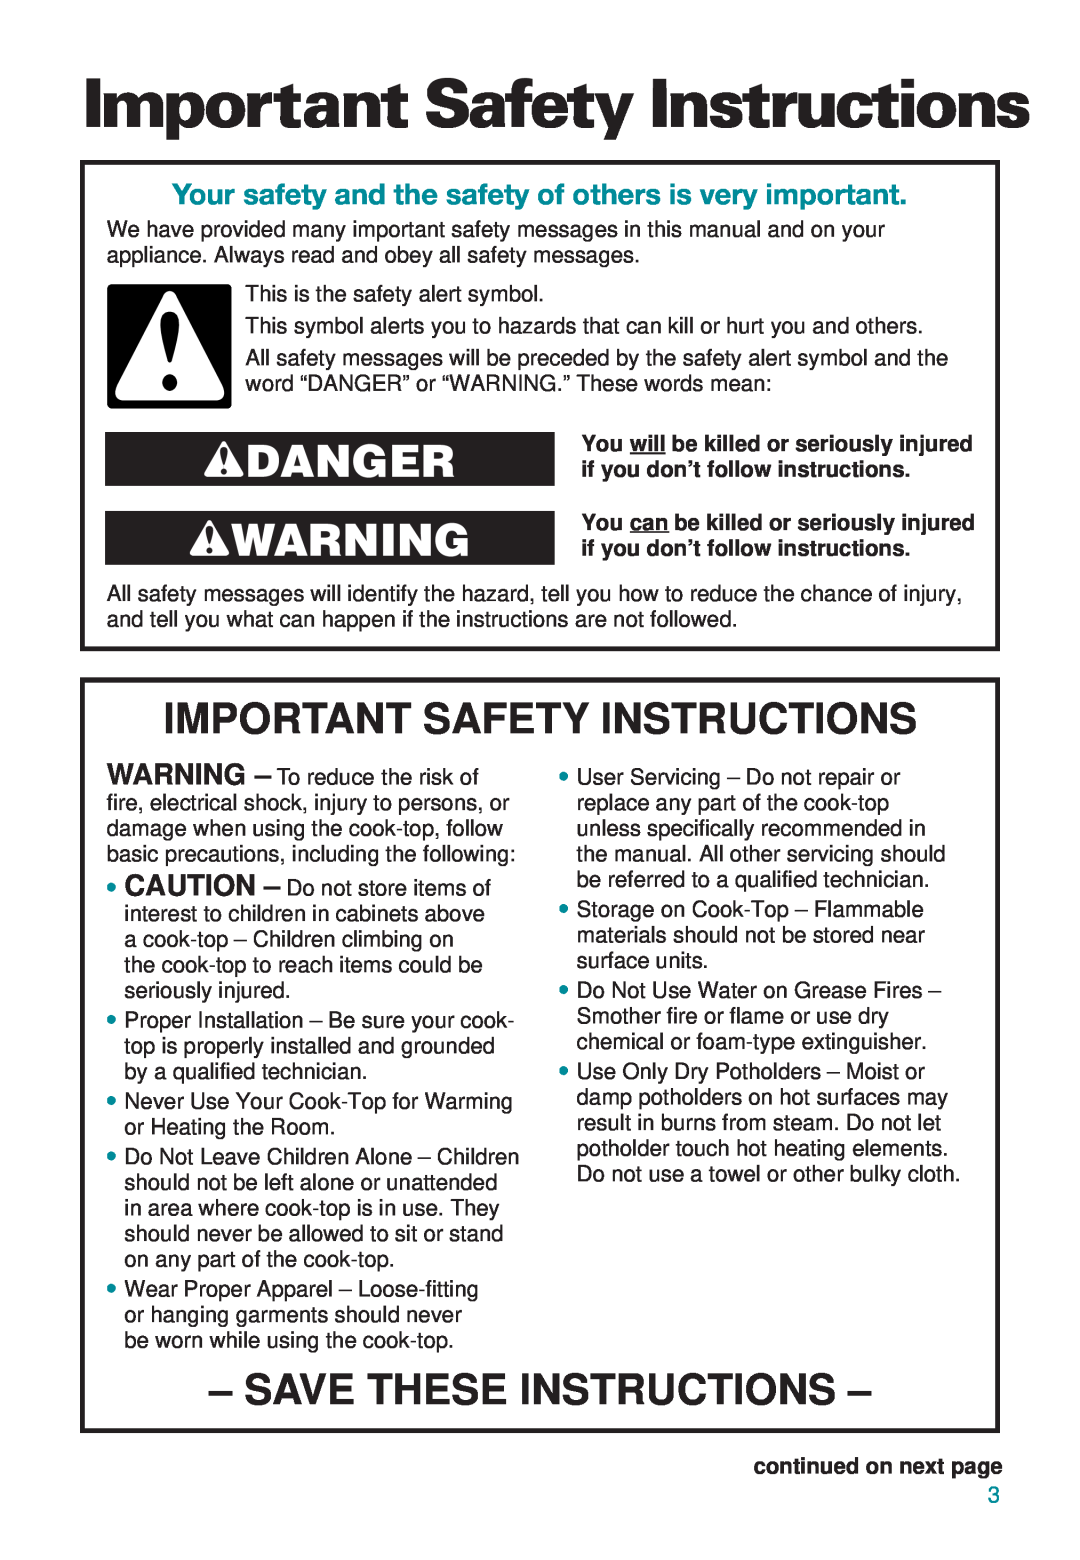 Whirlpool RC8600XB, GJ8646XD, GJ8640XB Important Safety Instructions, wDANGER wWARNING, Save These Instructions 